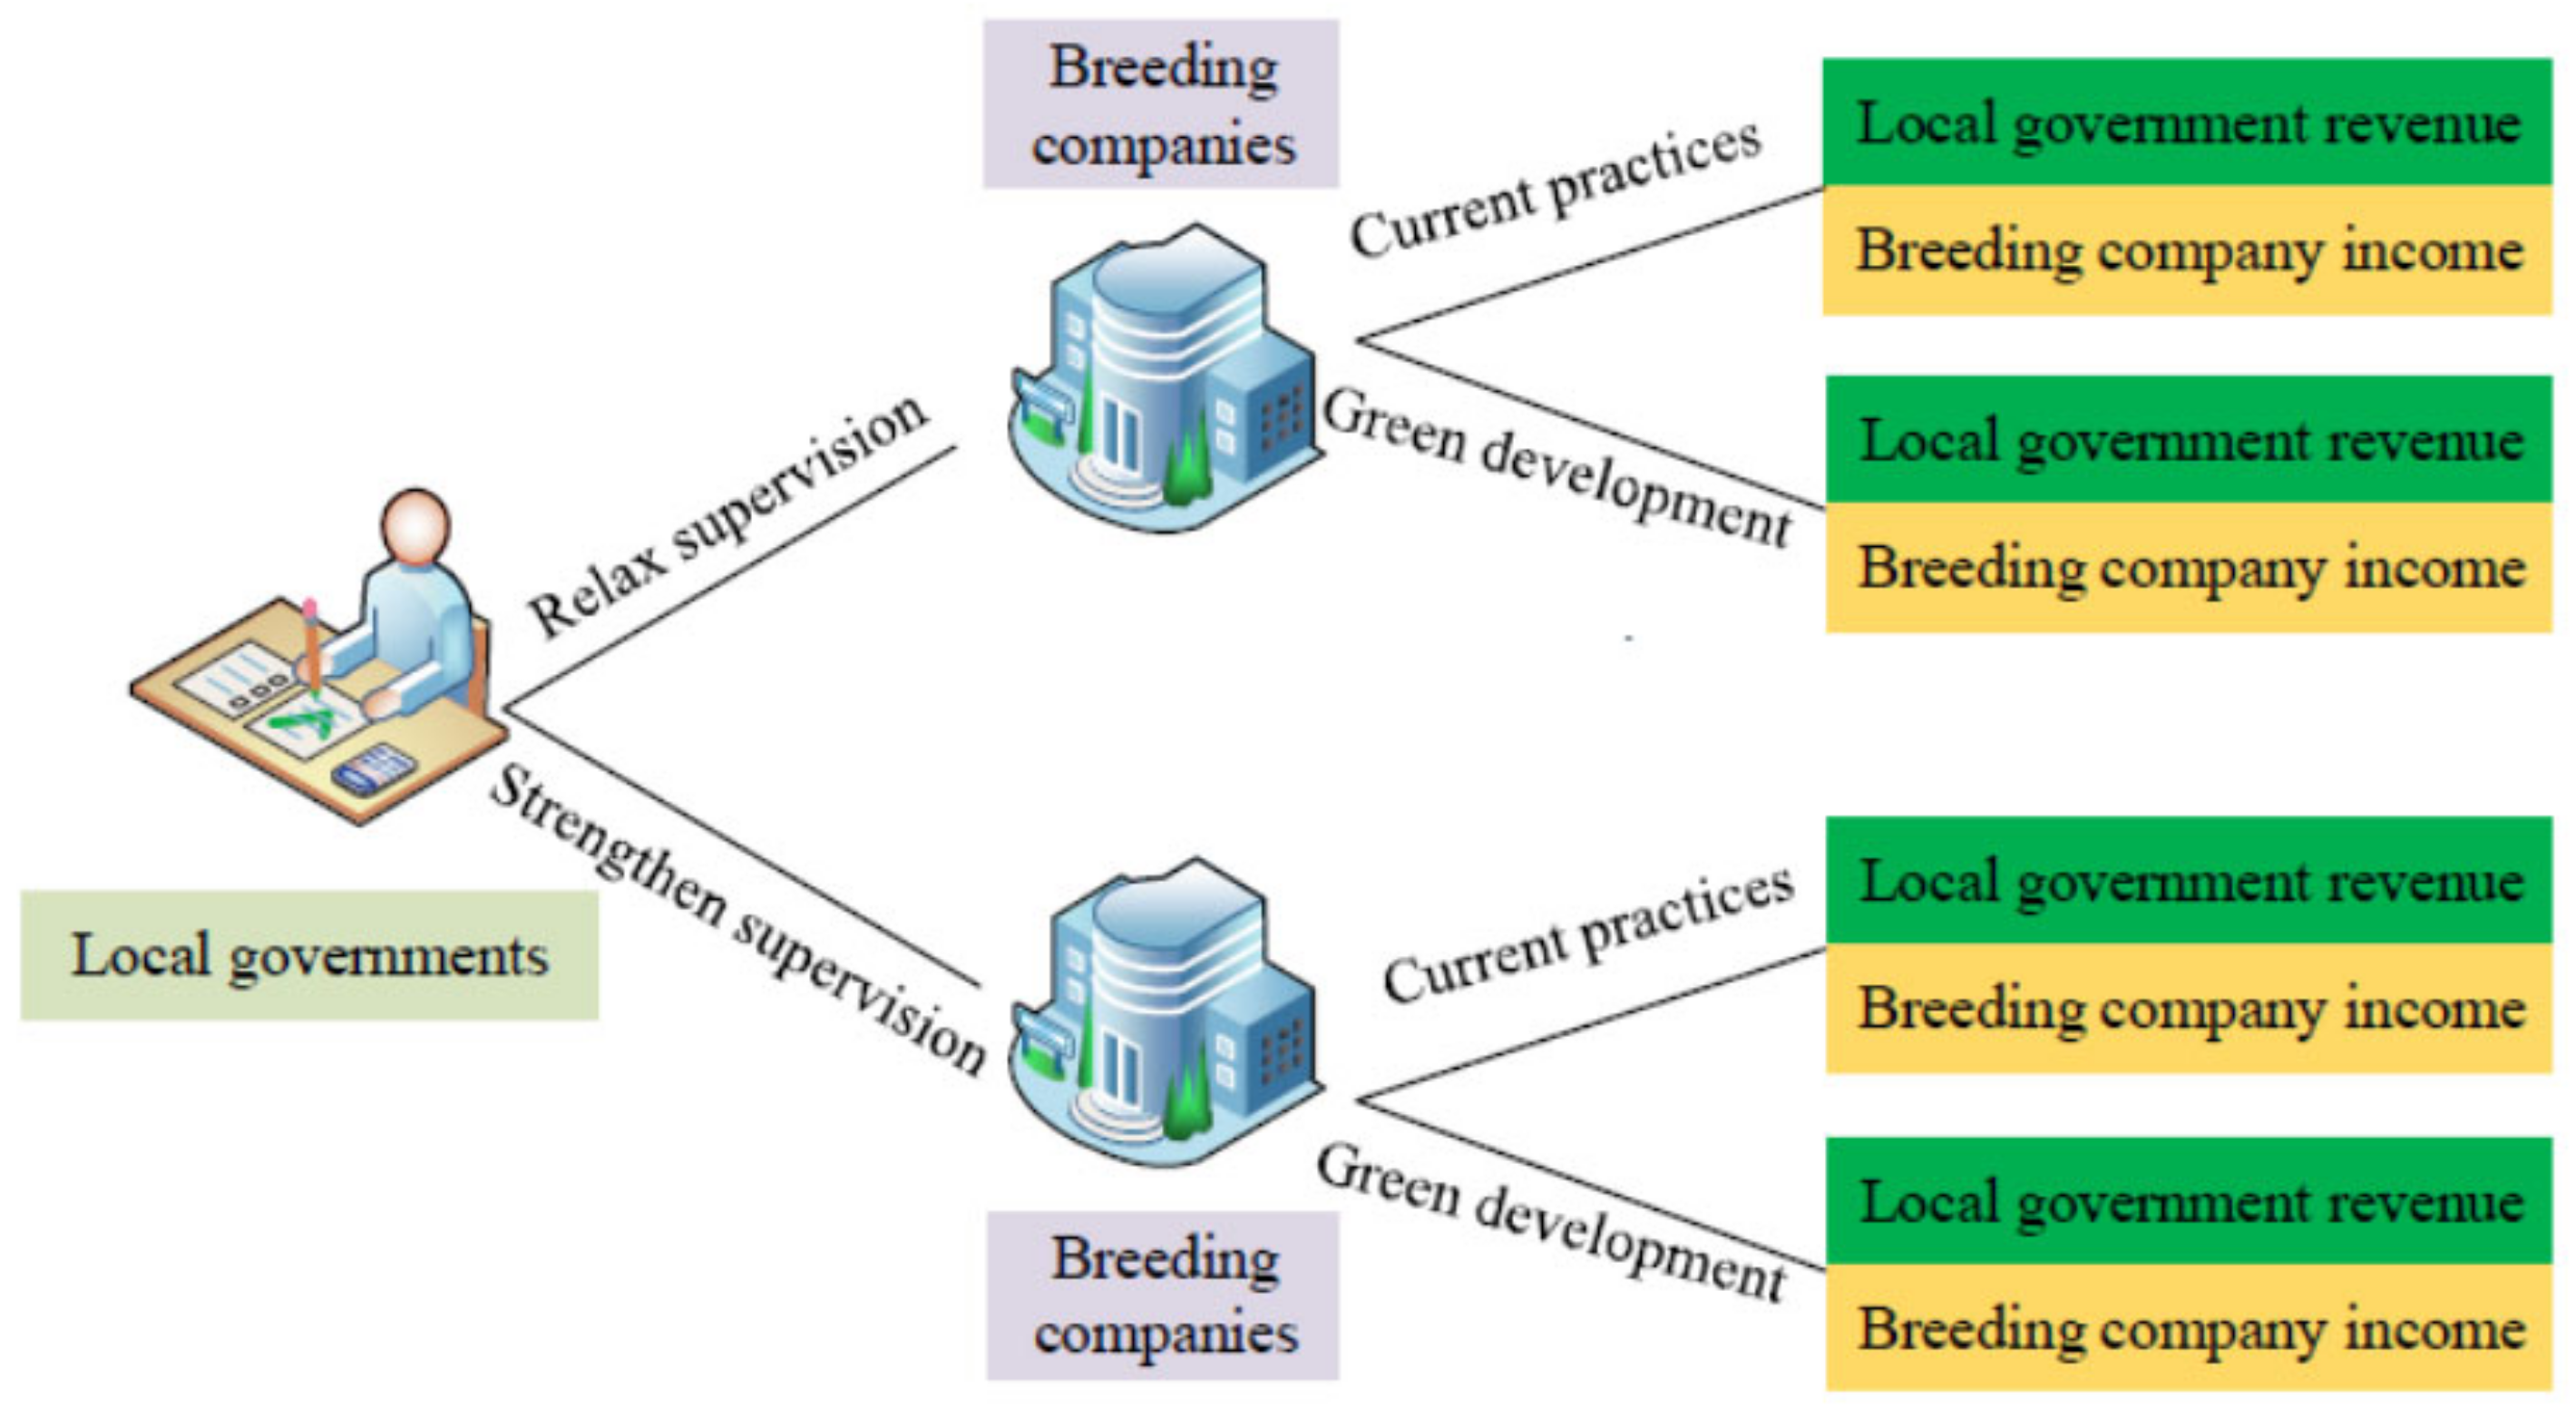 Sustainability | Free Full-Text | The Impact of Environmental Protection  Requirements on the Development of Green Animal Husbandry: An Evolutionary  Game between Local Governments and Breeding Companies